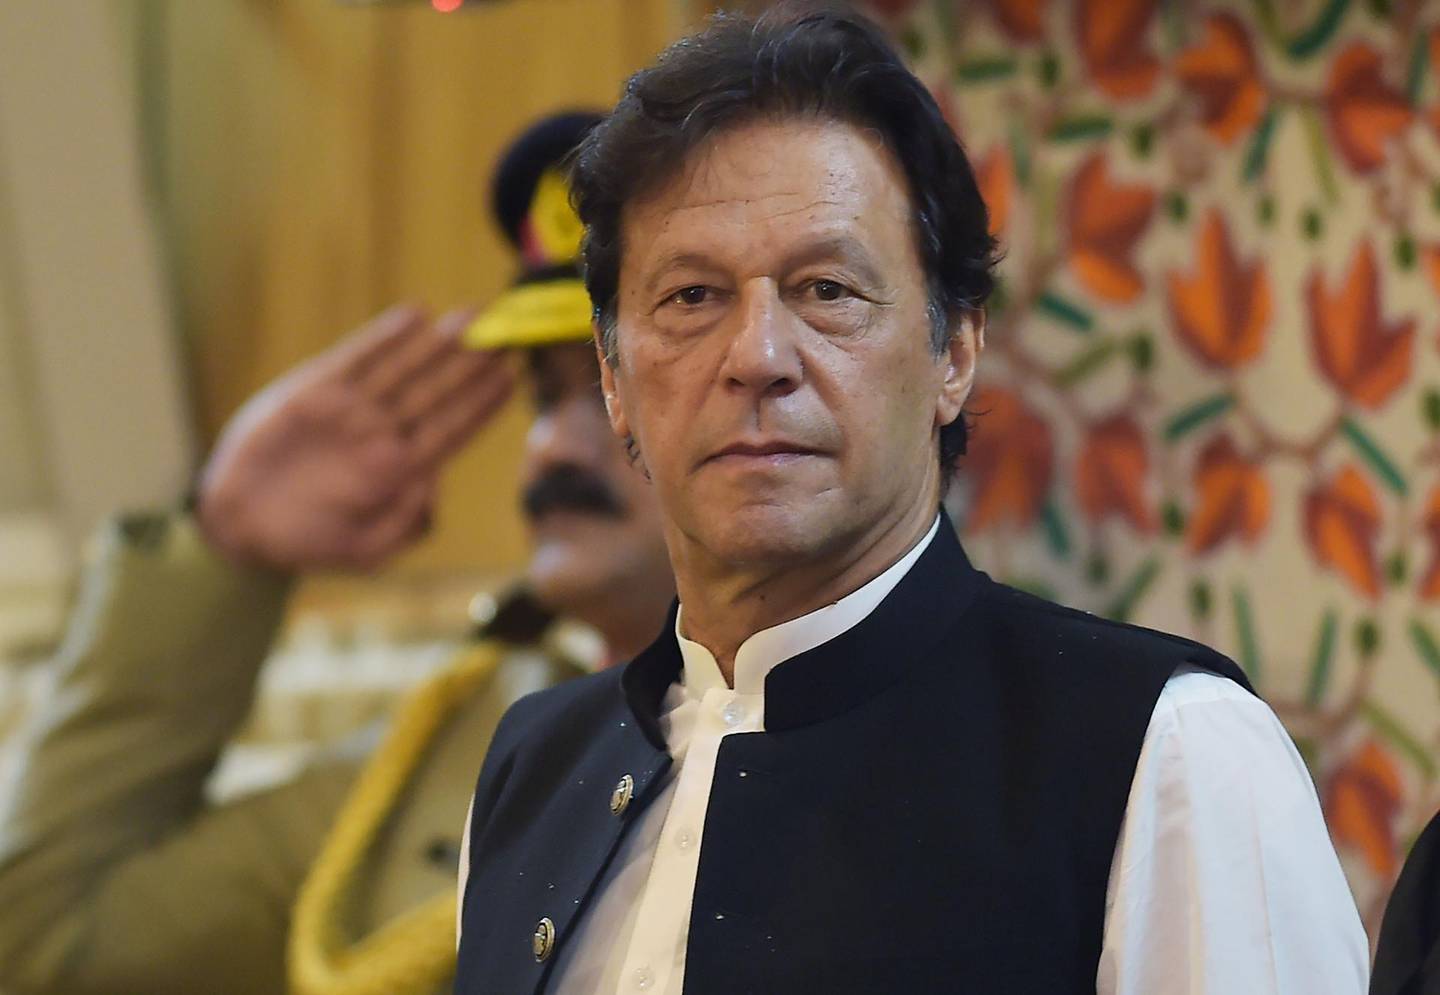 Pakistan's Prime Minister Imran Khan listens to the national anthem as he arrives at the legislative assembly in Muzaffarabad, the capital of Pakistan-controlled Kashmir on August 14, 2019 to mark the country's Independence Day. His visit to mark the country's Independence Day comes more than a week after Indian Prime Minister Narendra Modi delivered a surprise executive decree to strip its portion of the Muslim-majority Himalayan region of its special status. / AFP / AAMIR QURESHI
